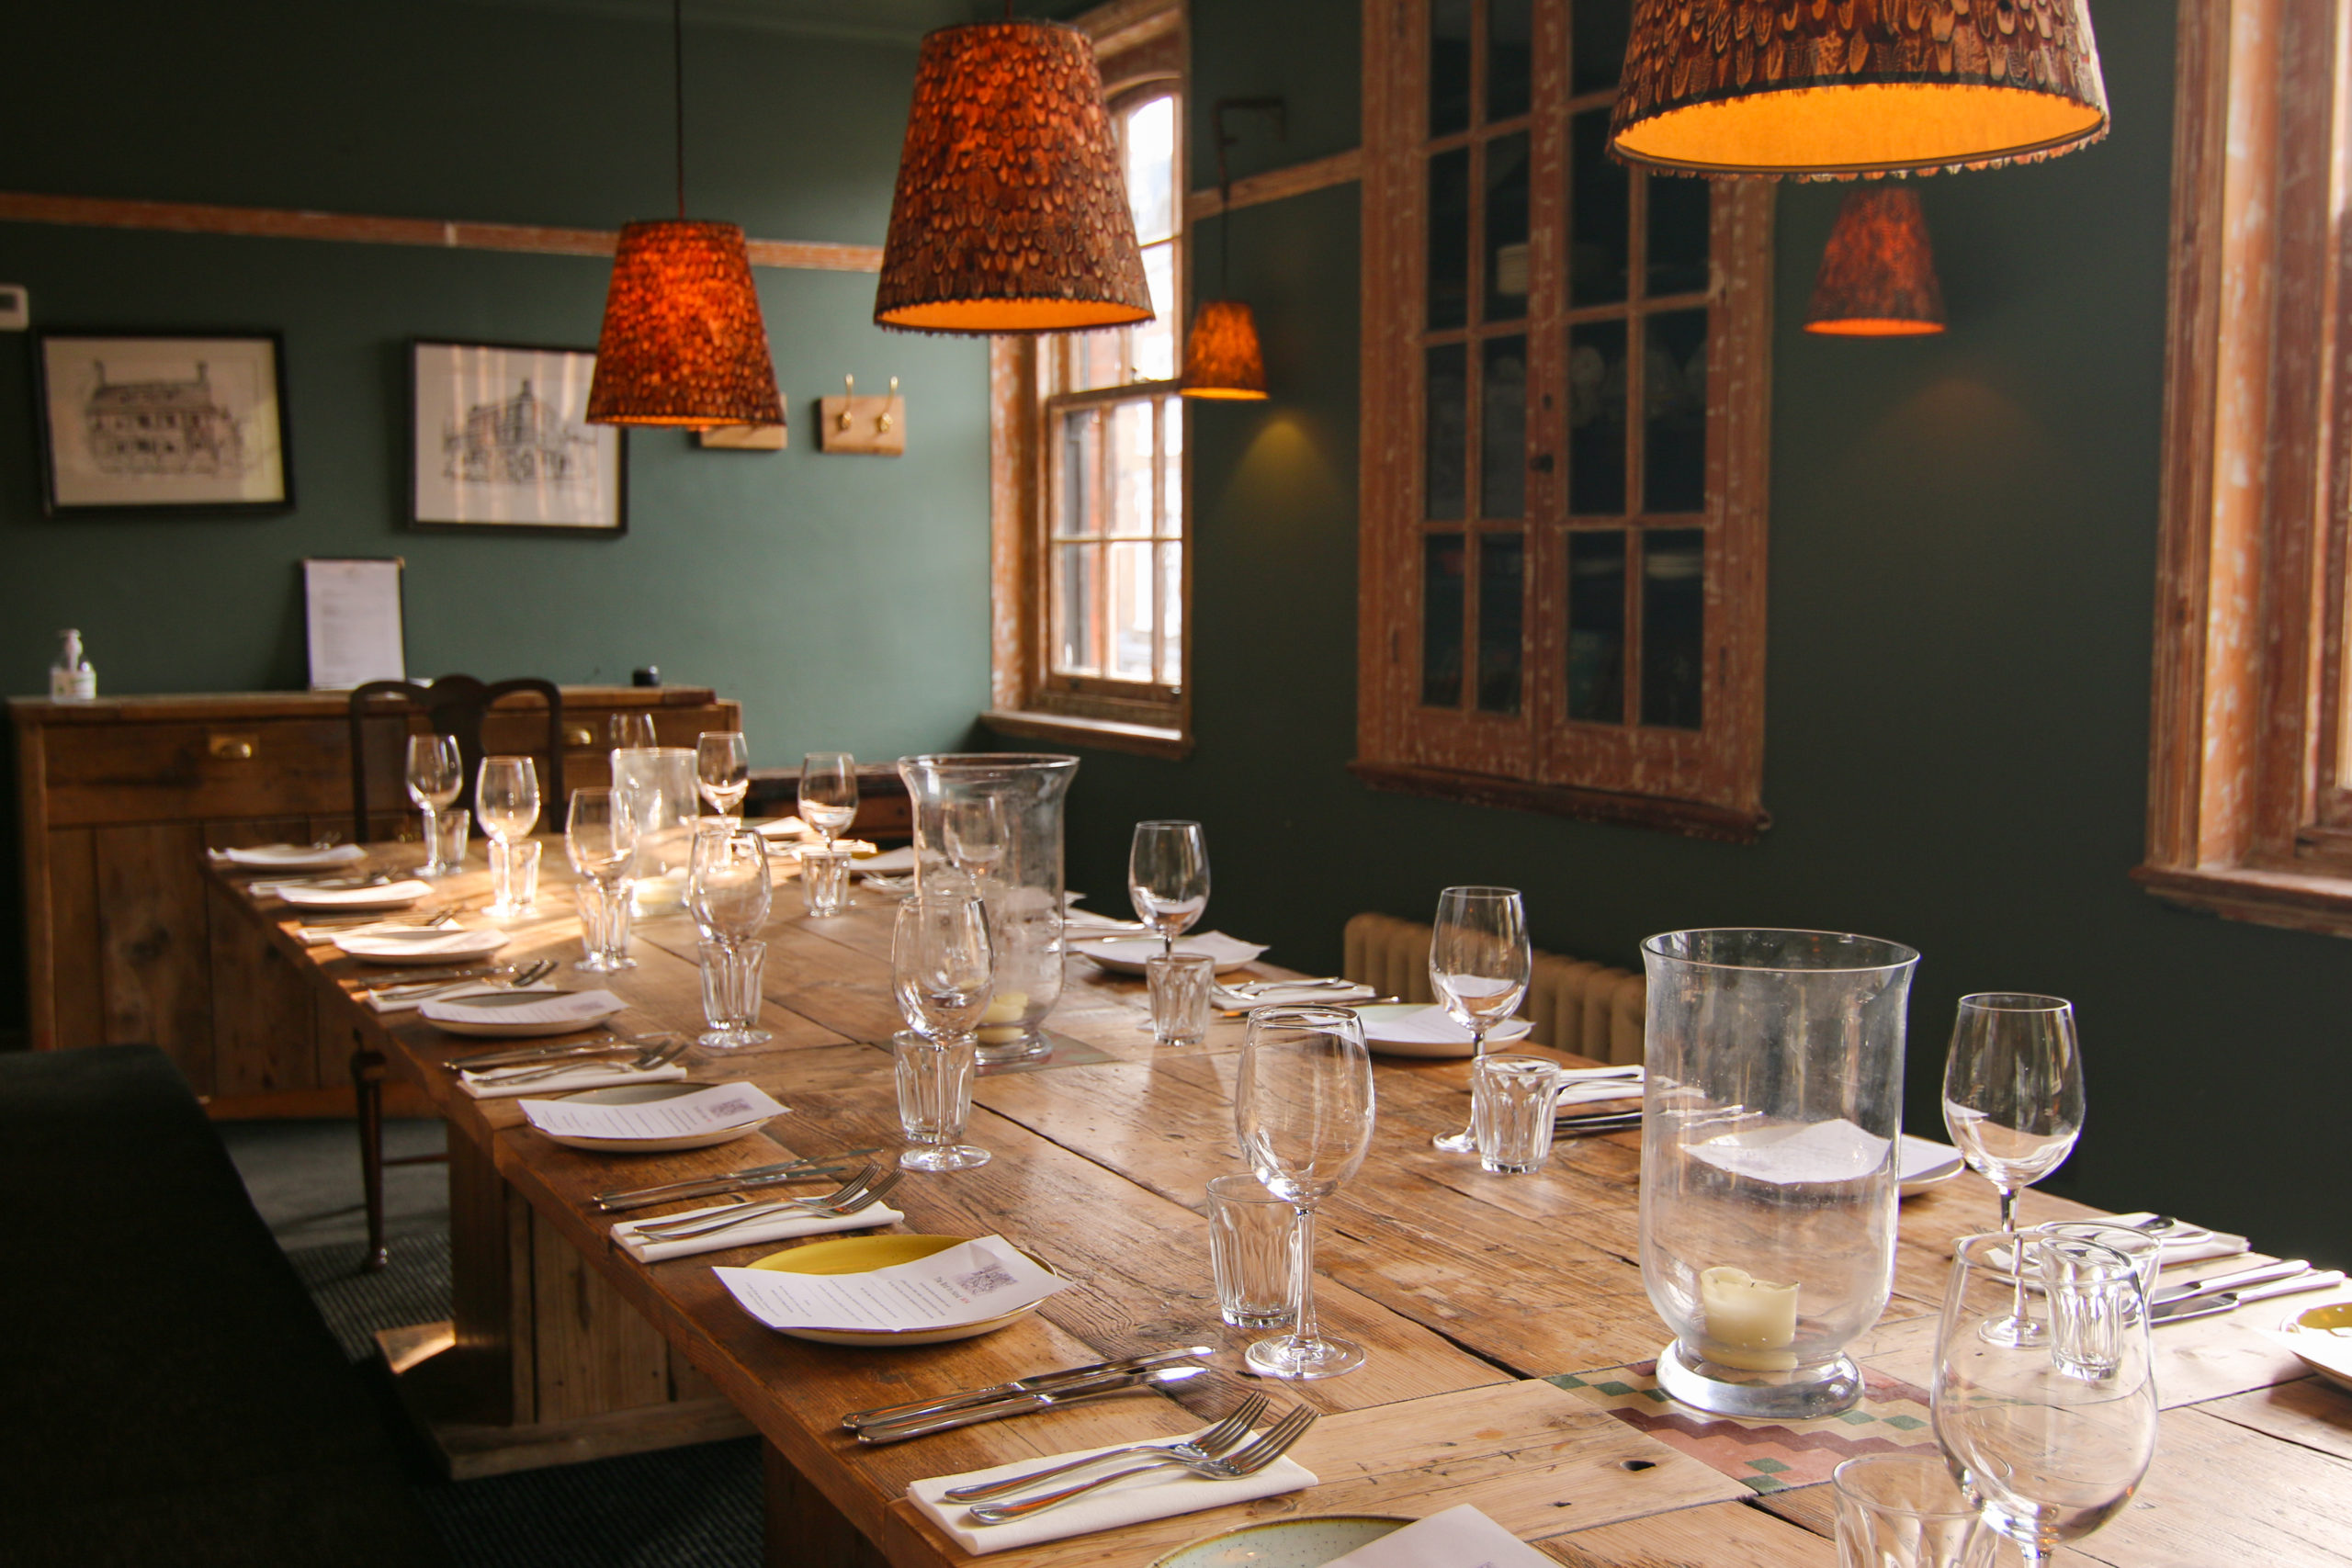 Our Private Dining Room